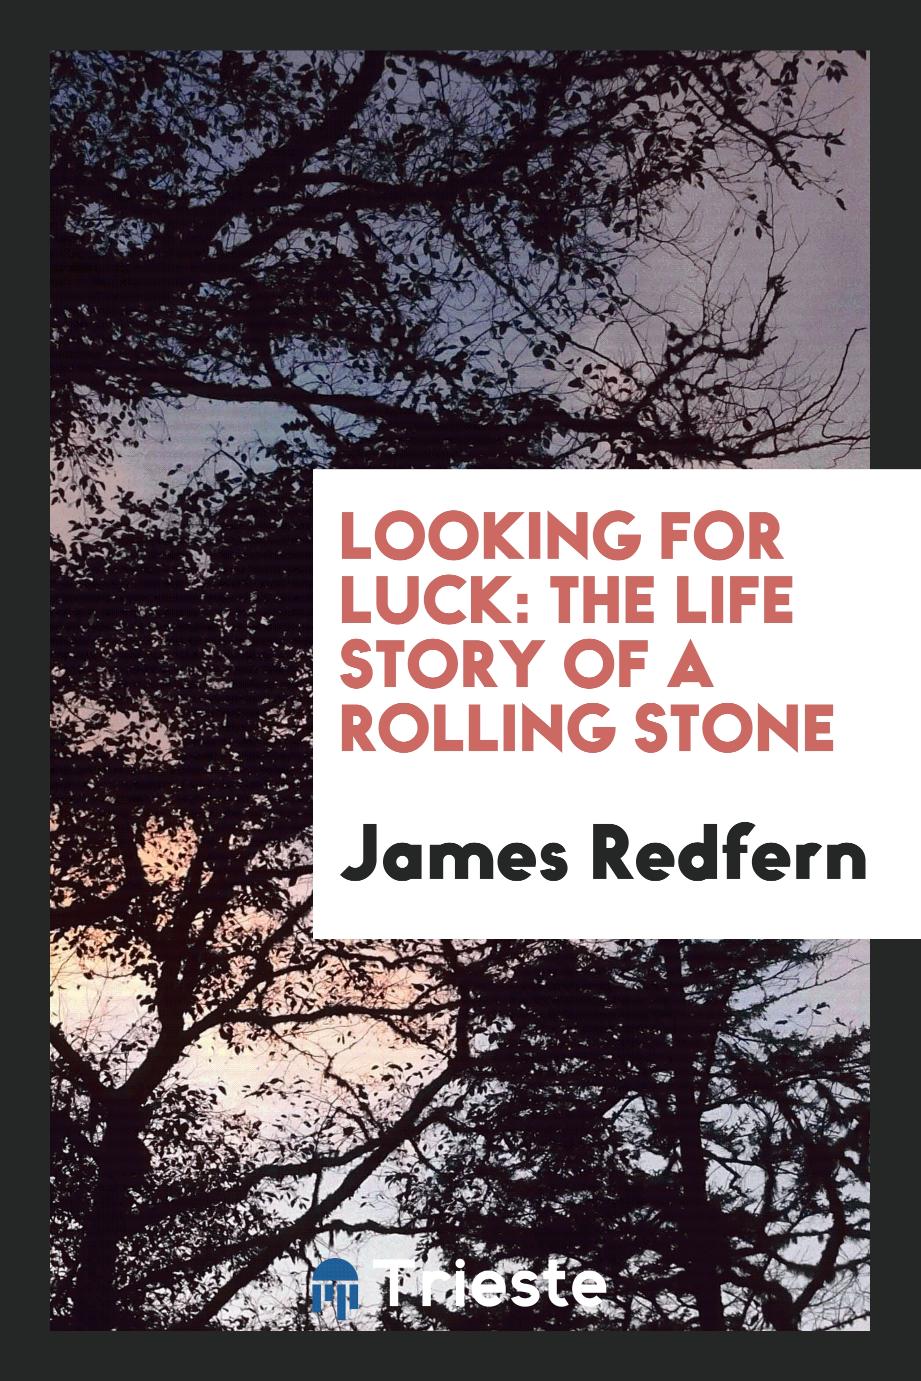 Looking for Luck: The Life Story of a Rolling Stone